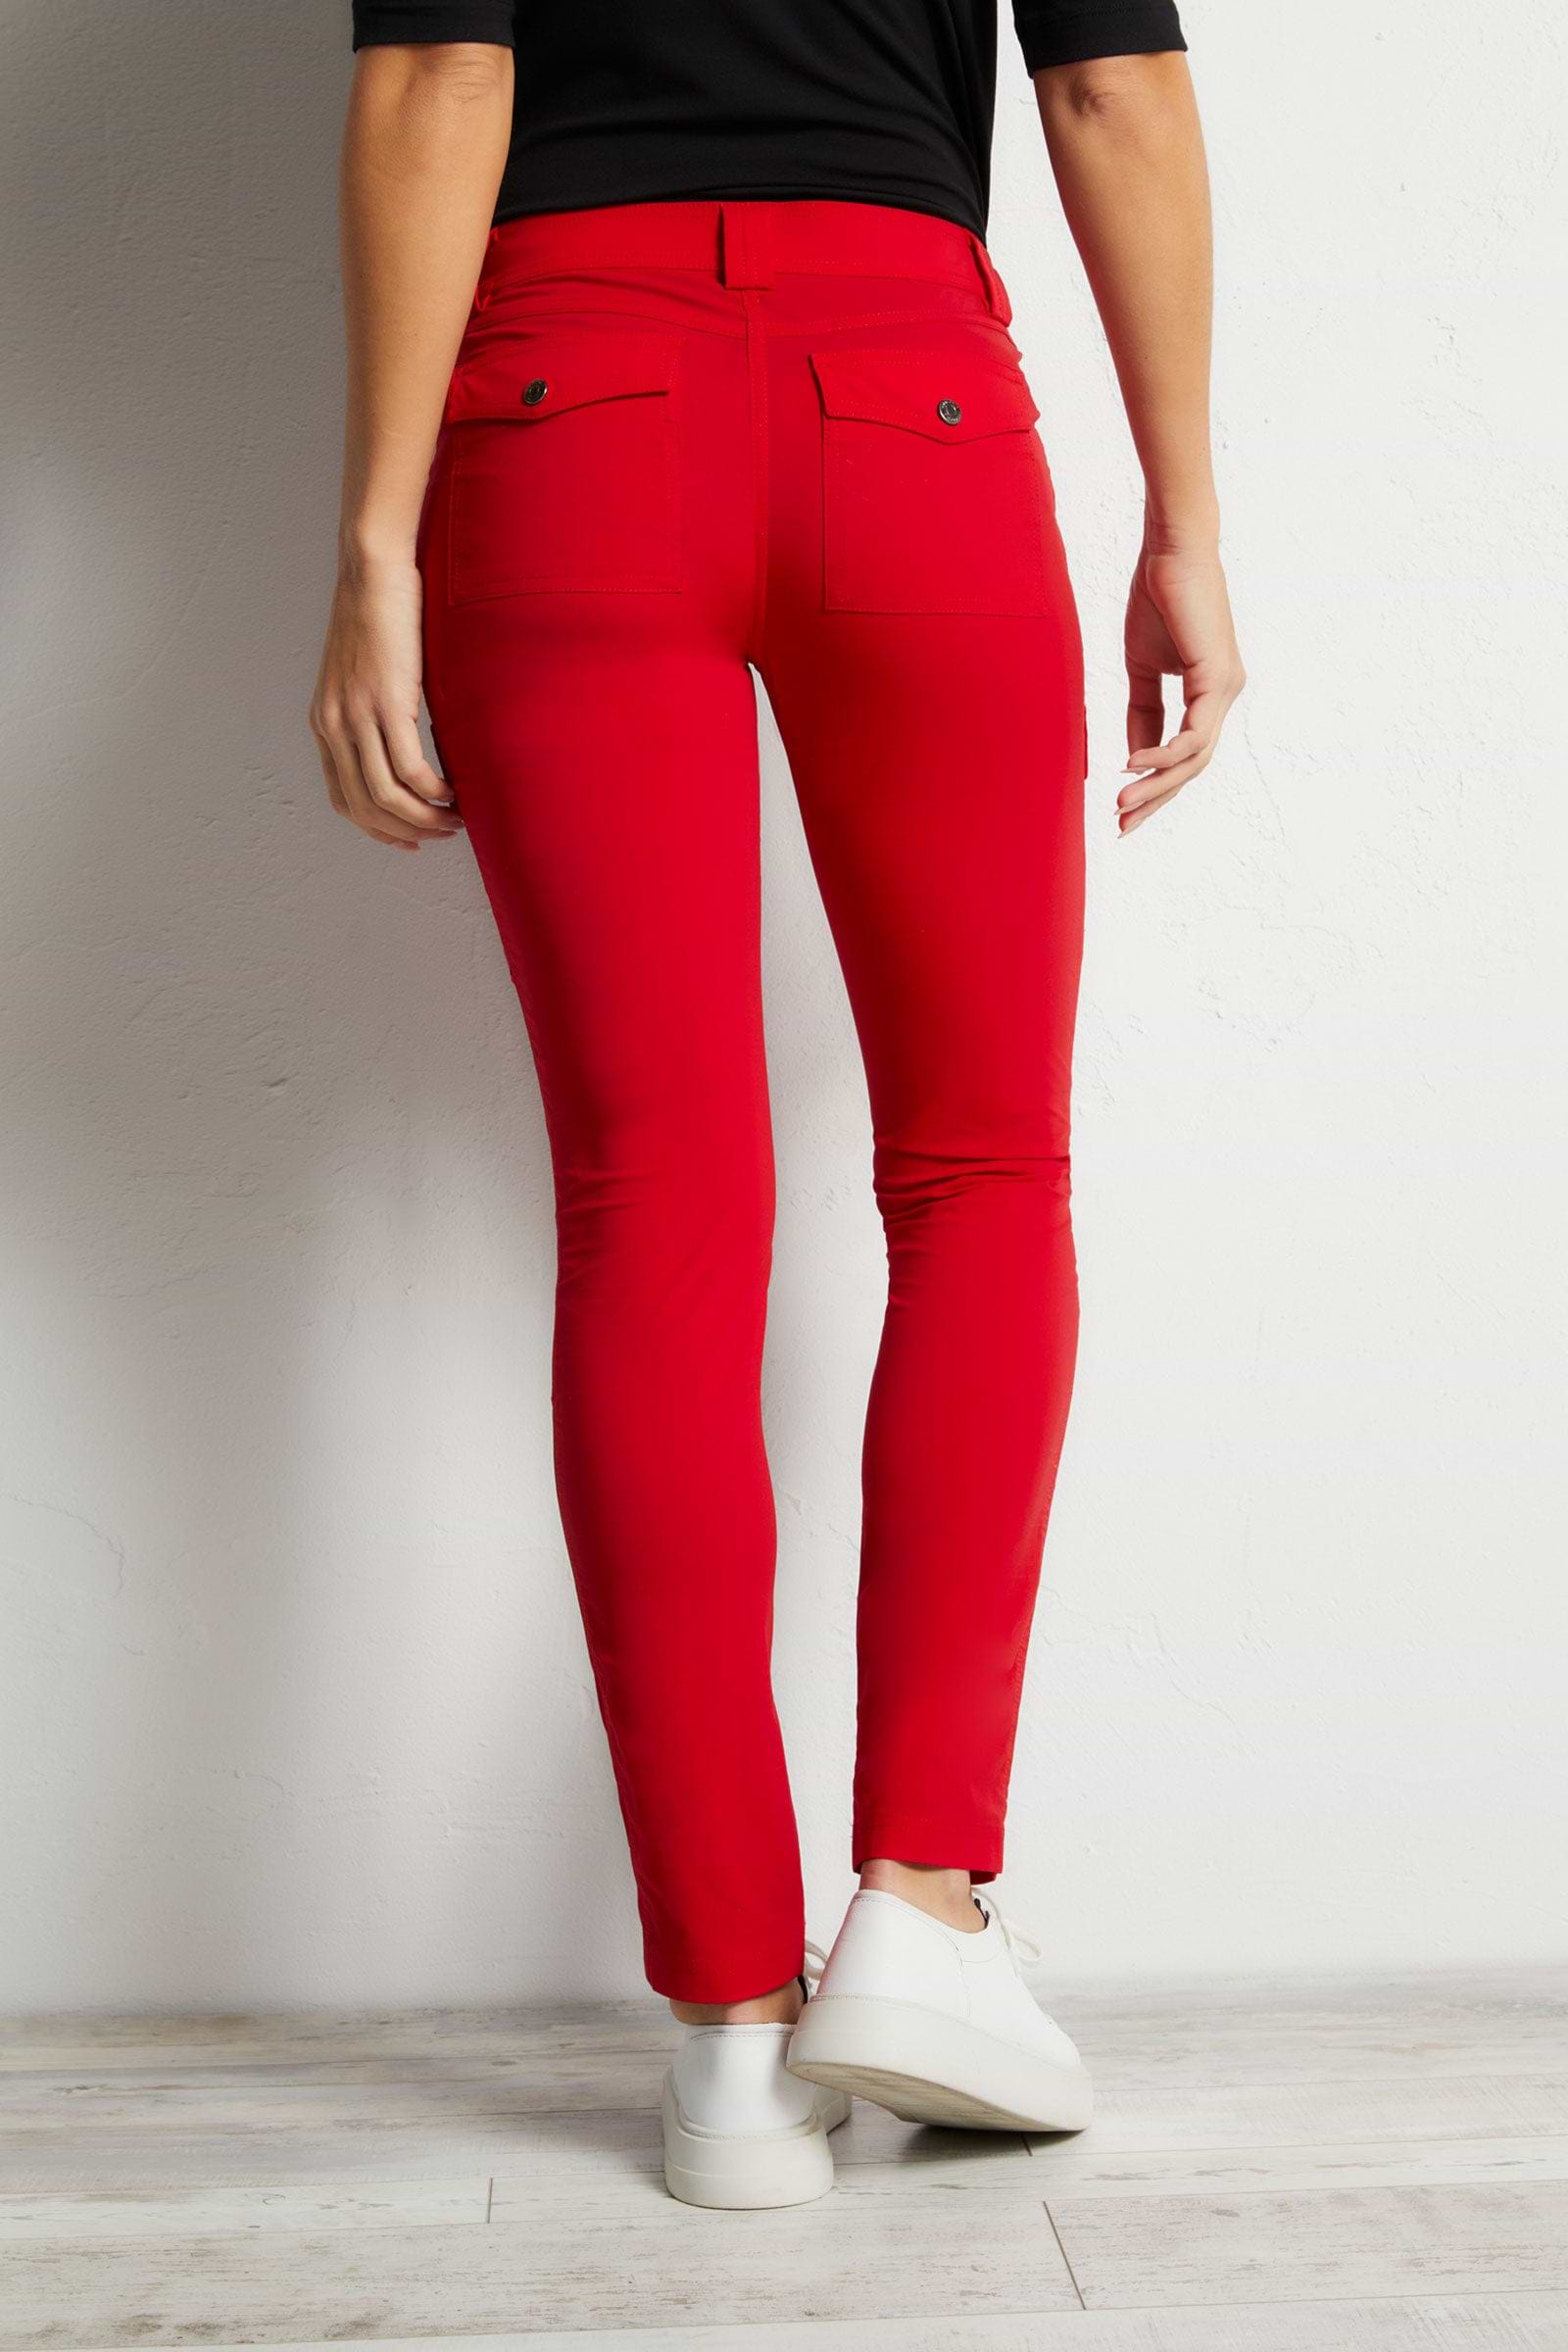 The Best Travel Cargo Pants. Back Profile of the Kate Skinny Cargo Pant in Atomic Red.